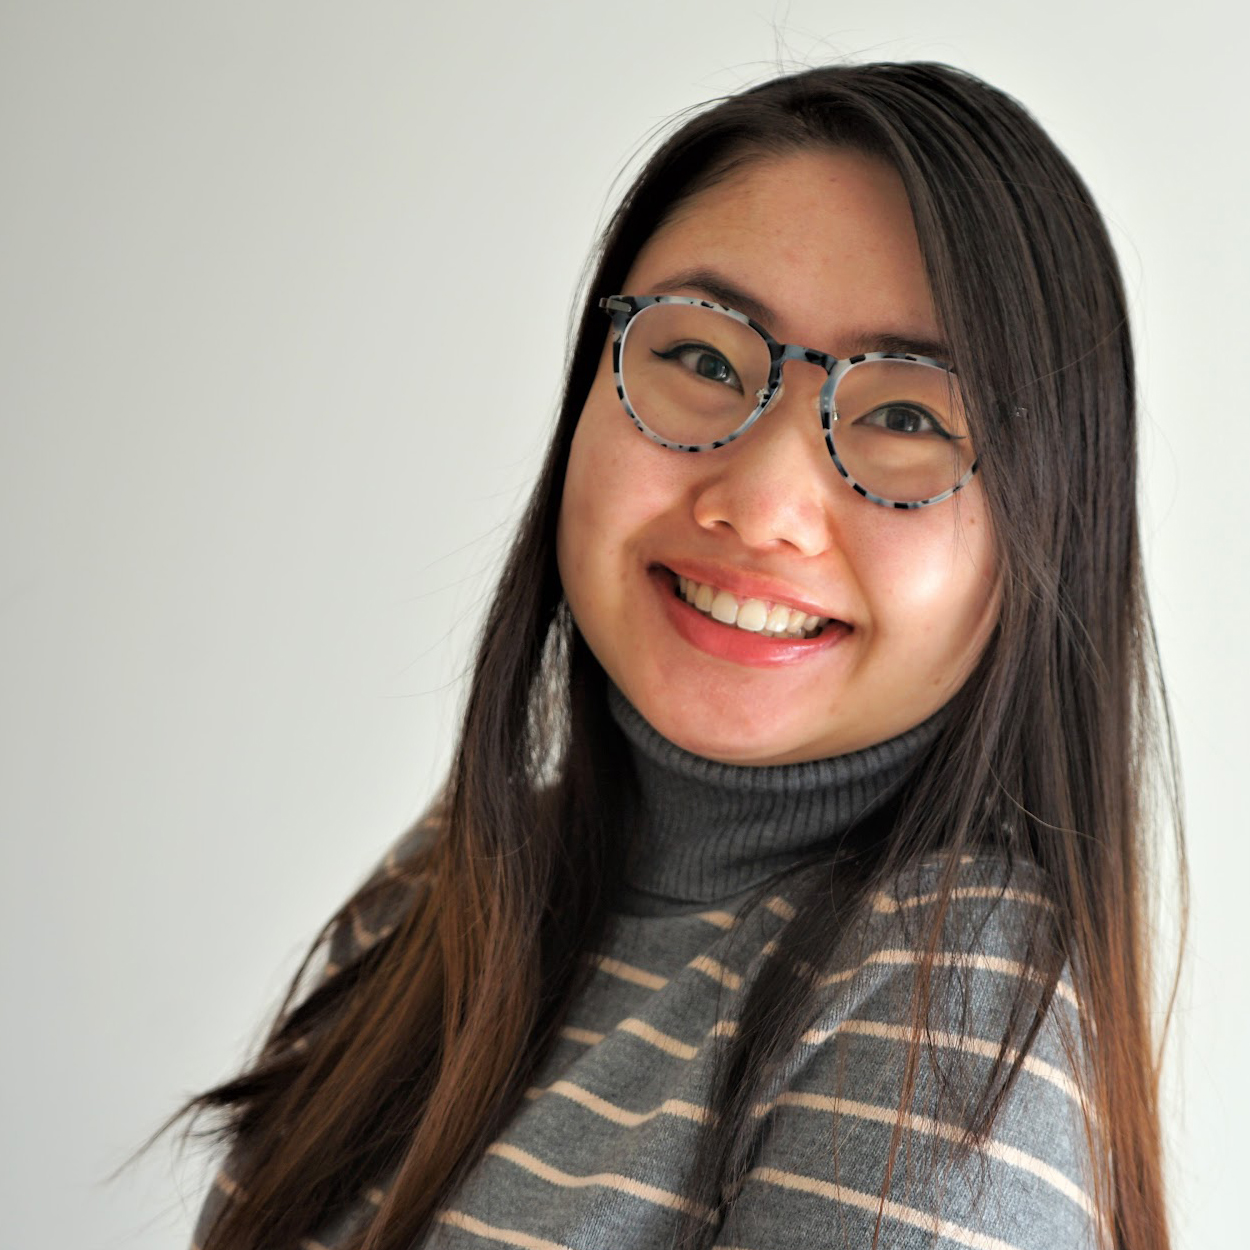 A young Asian woman with glasses smiles at the camera